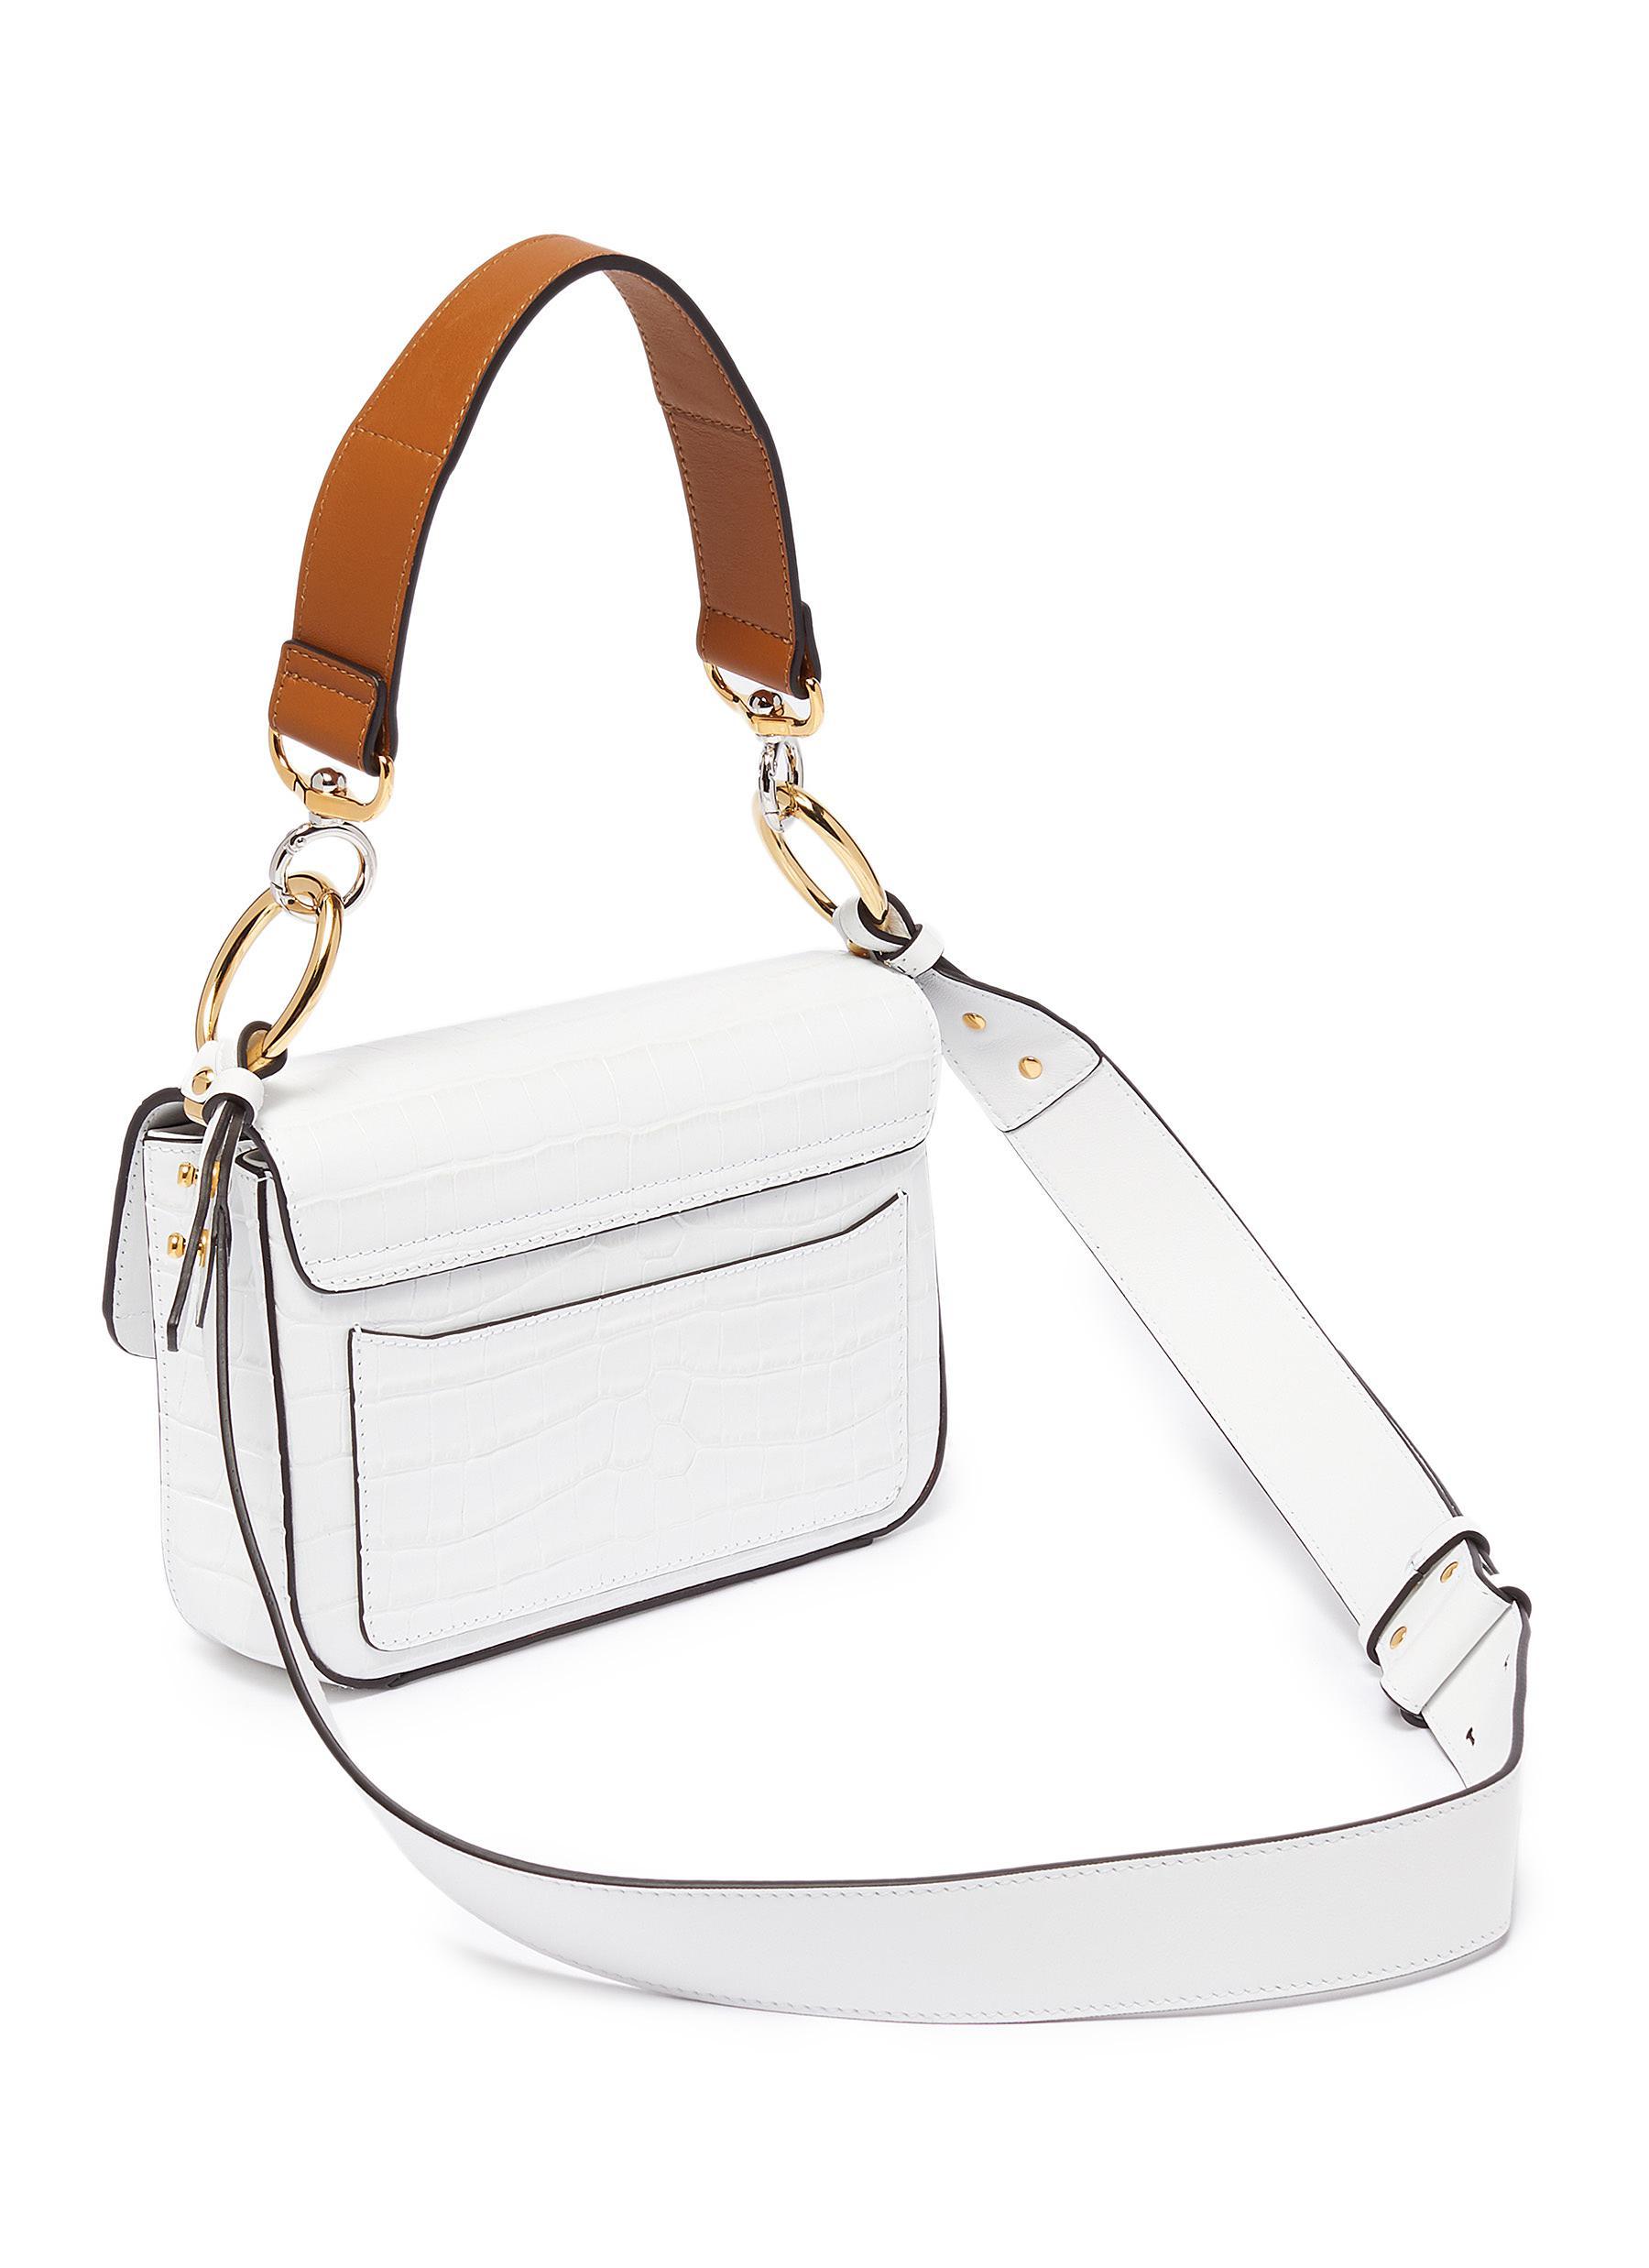 Chloé 'chloé C' Small Croc Embossed Leather Double Carry Bag in White | Lyst